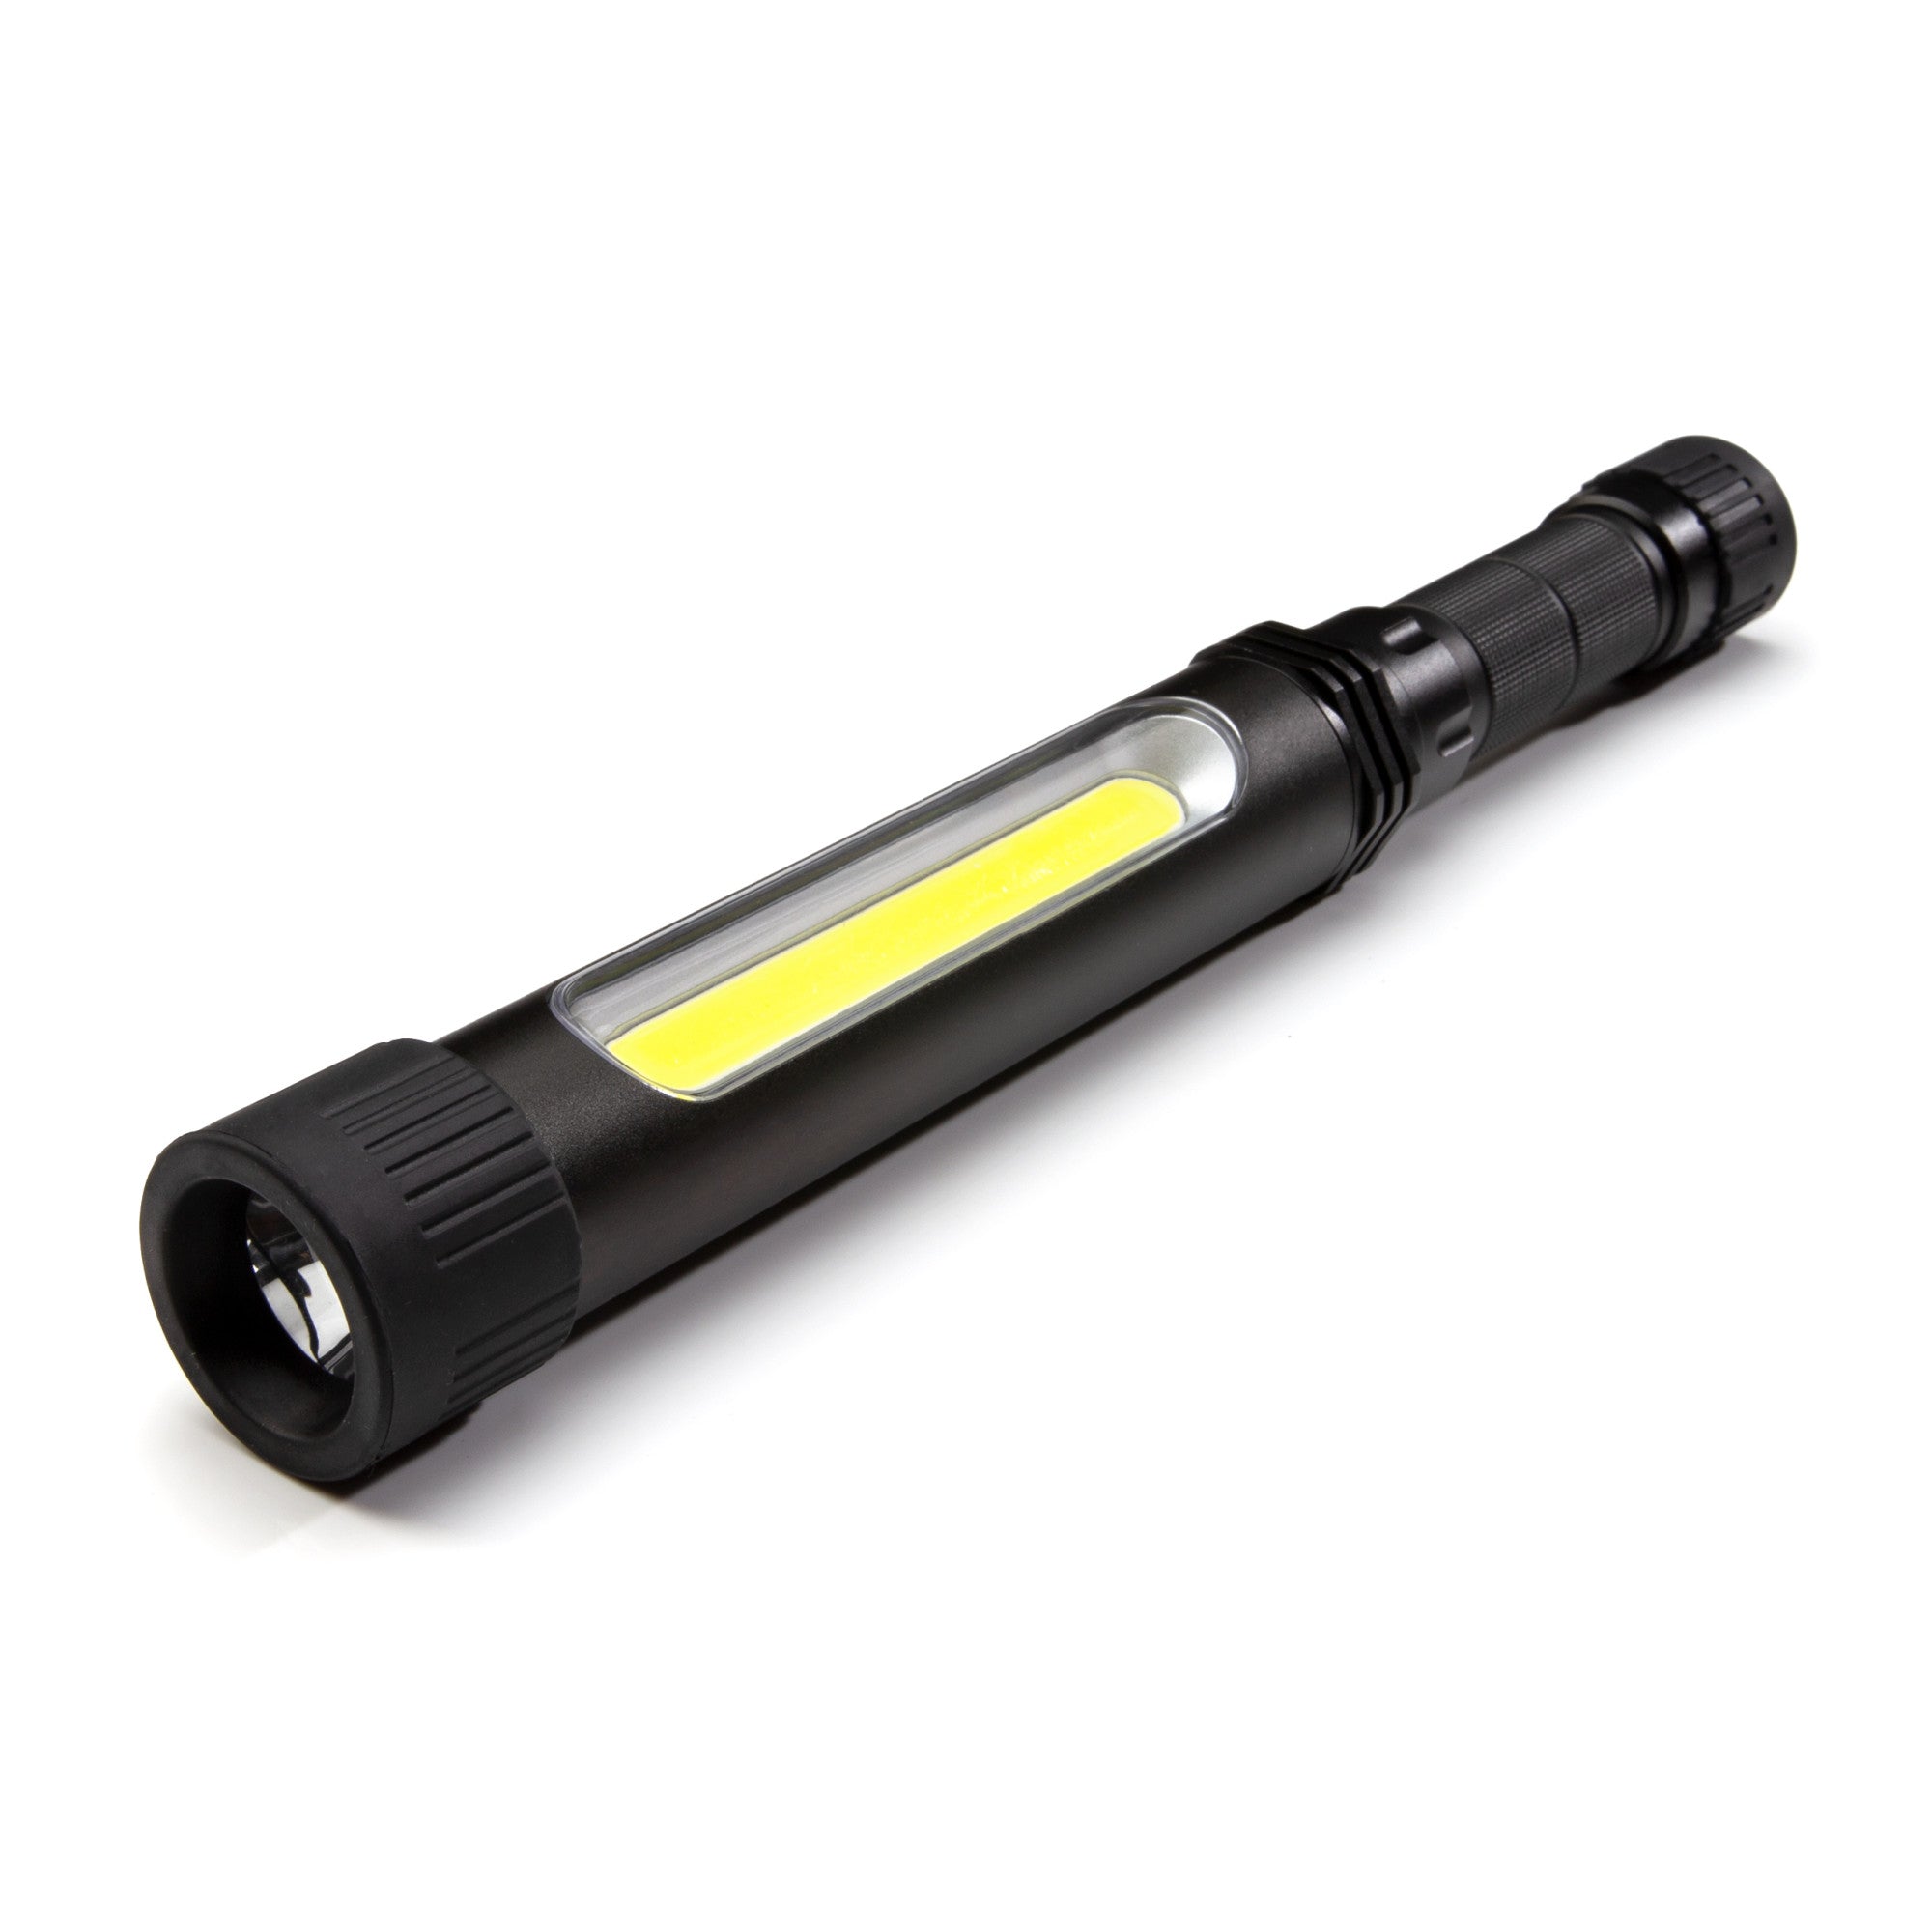 Inspector 500. Lampe torche stylo LED, rechargeable - Nebo